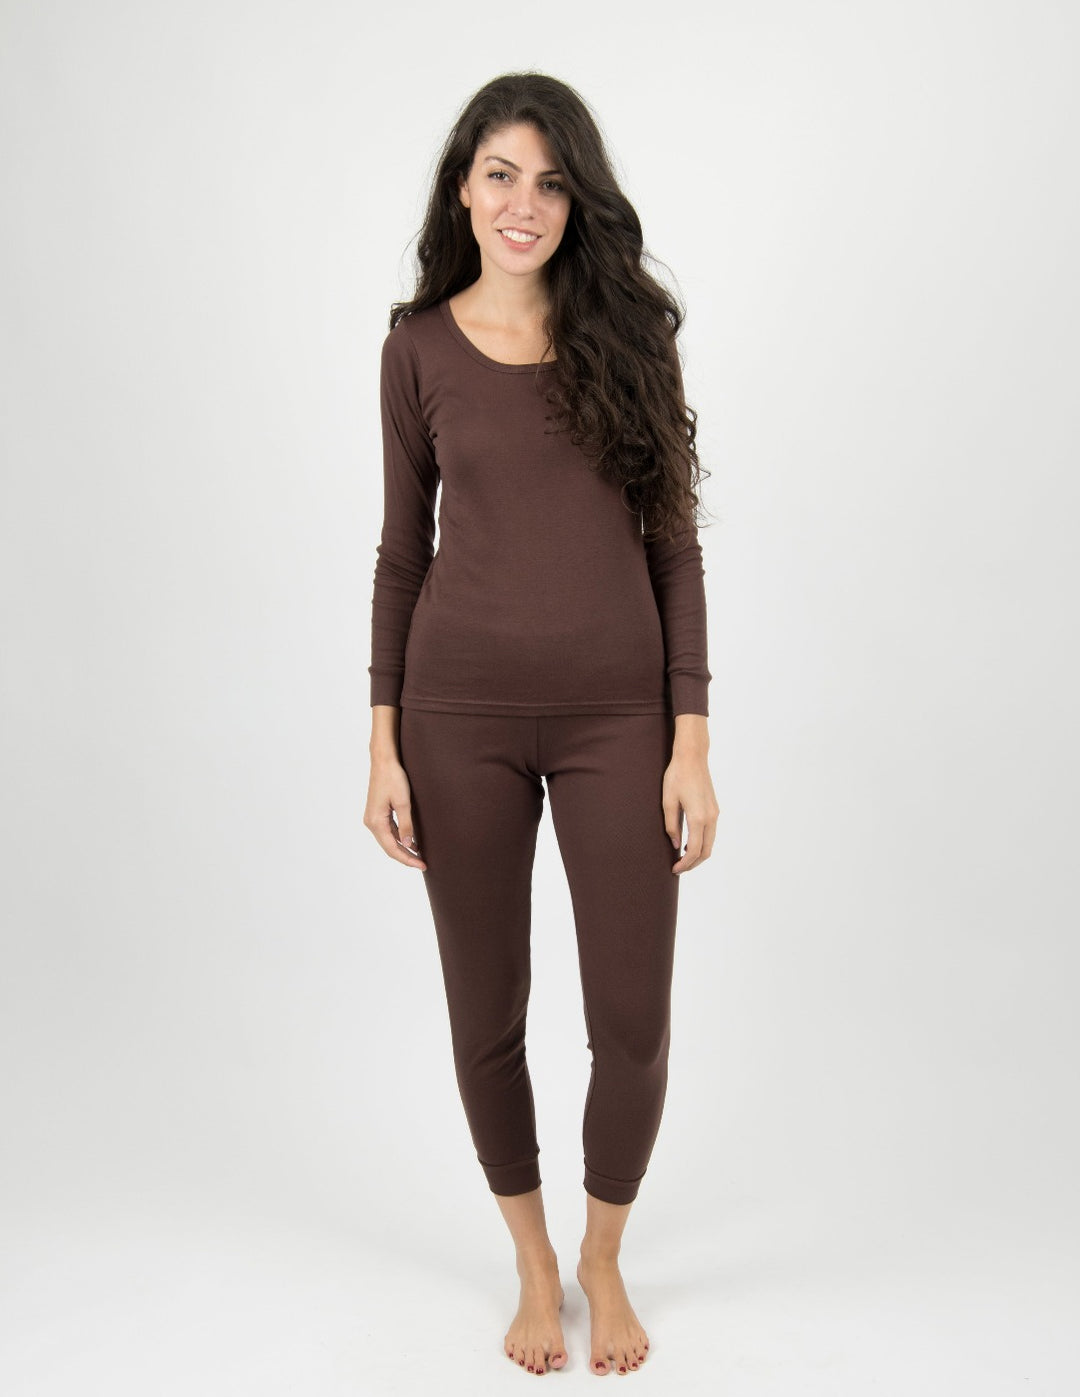 solid color brown women's footed pajamas